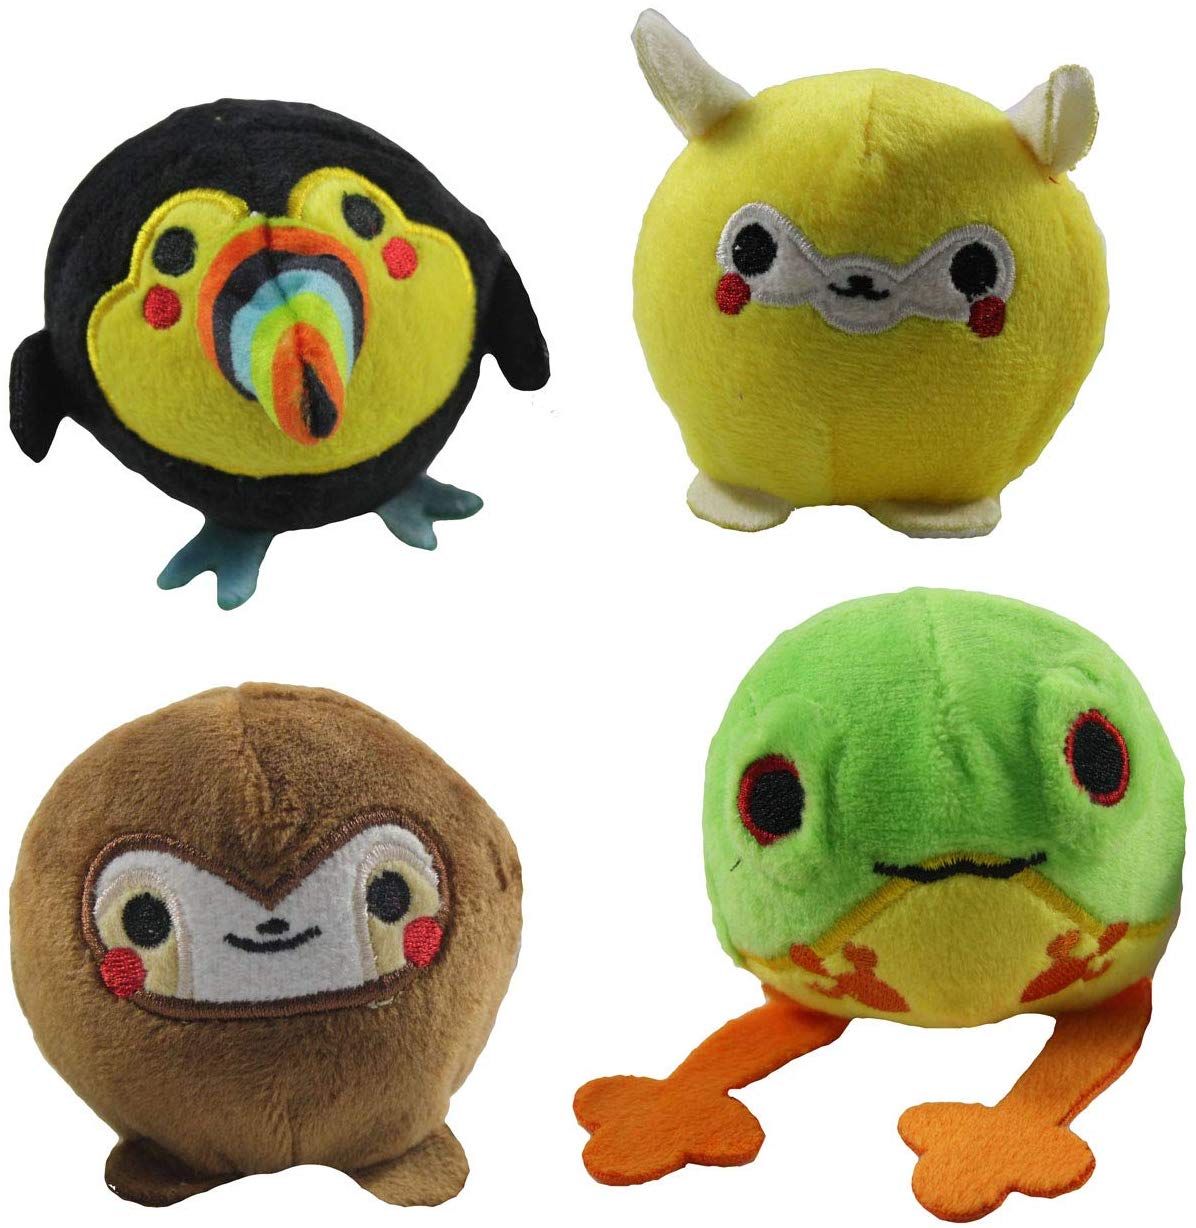 Plush Animal Squishie, Introducing our adorable squishy animal balls! These delightful plush toys are shaped like your favorite animals and are sure to bring a smile to your face. With their extra squidgy filling, they are the perfect stress-relief toy to squeeze and squash.Each ball is crafted from high-quality, soft plush material that is safe and gentle to the touch. Great for both kids and adults, these squishy balls make a fun and unique gift for any occasion. Whether you need a stress reliever for you